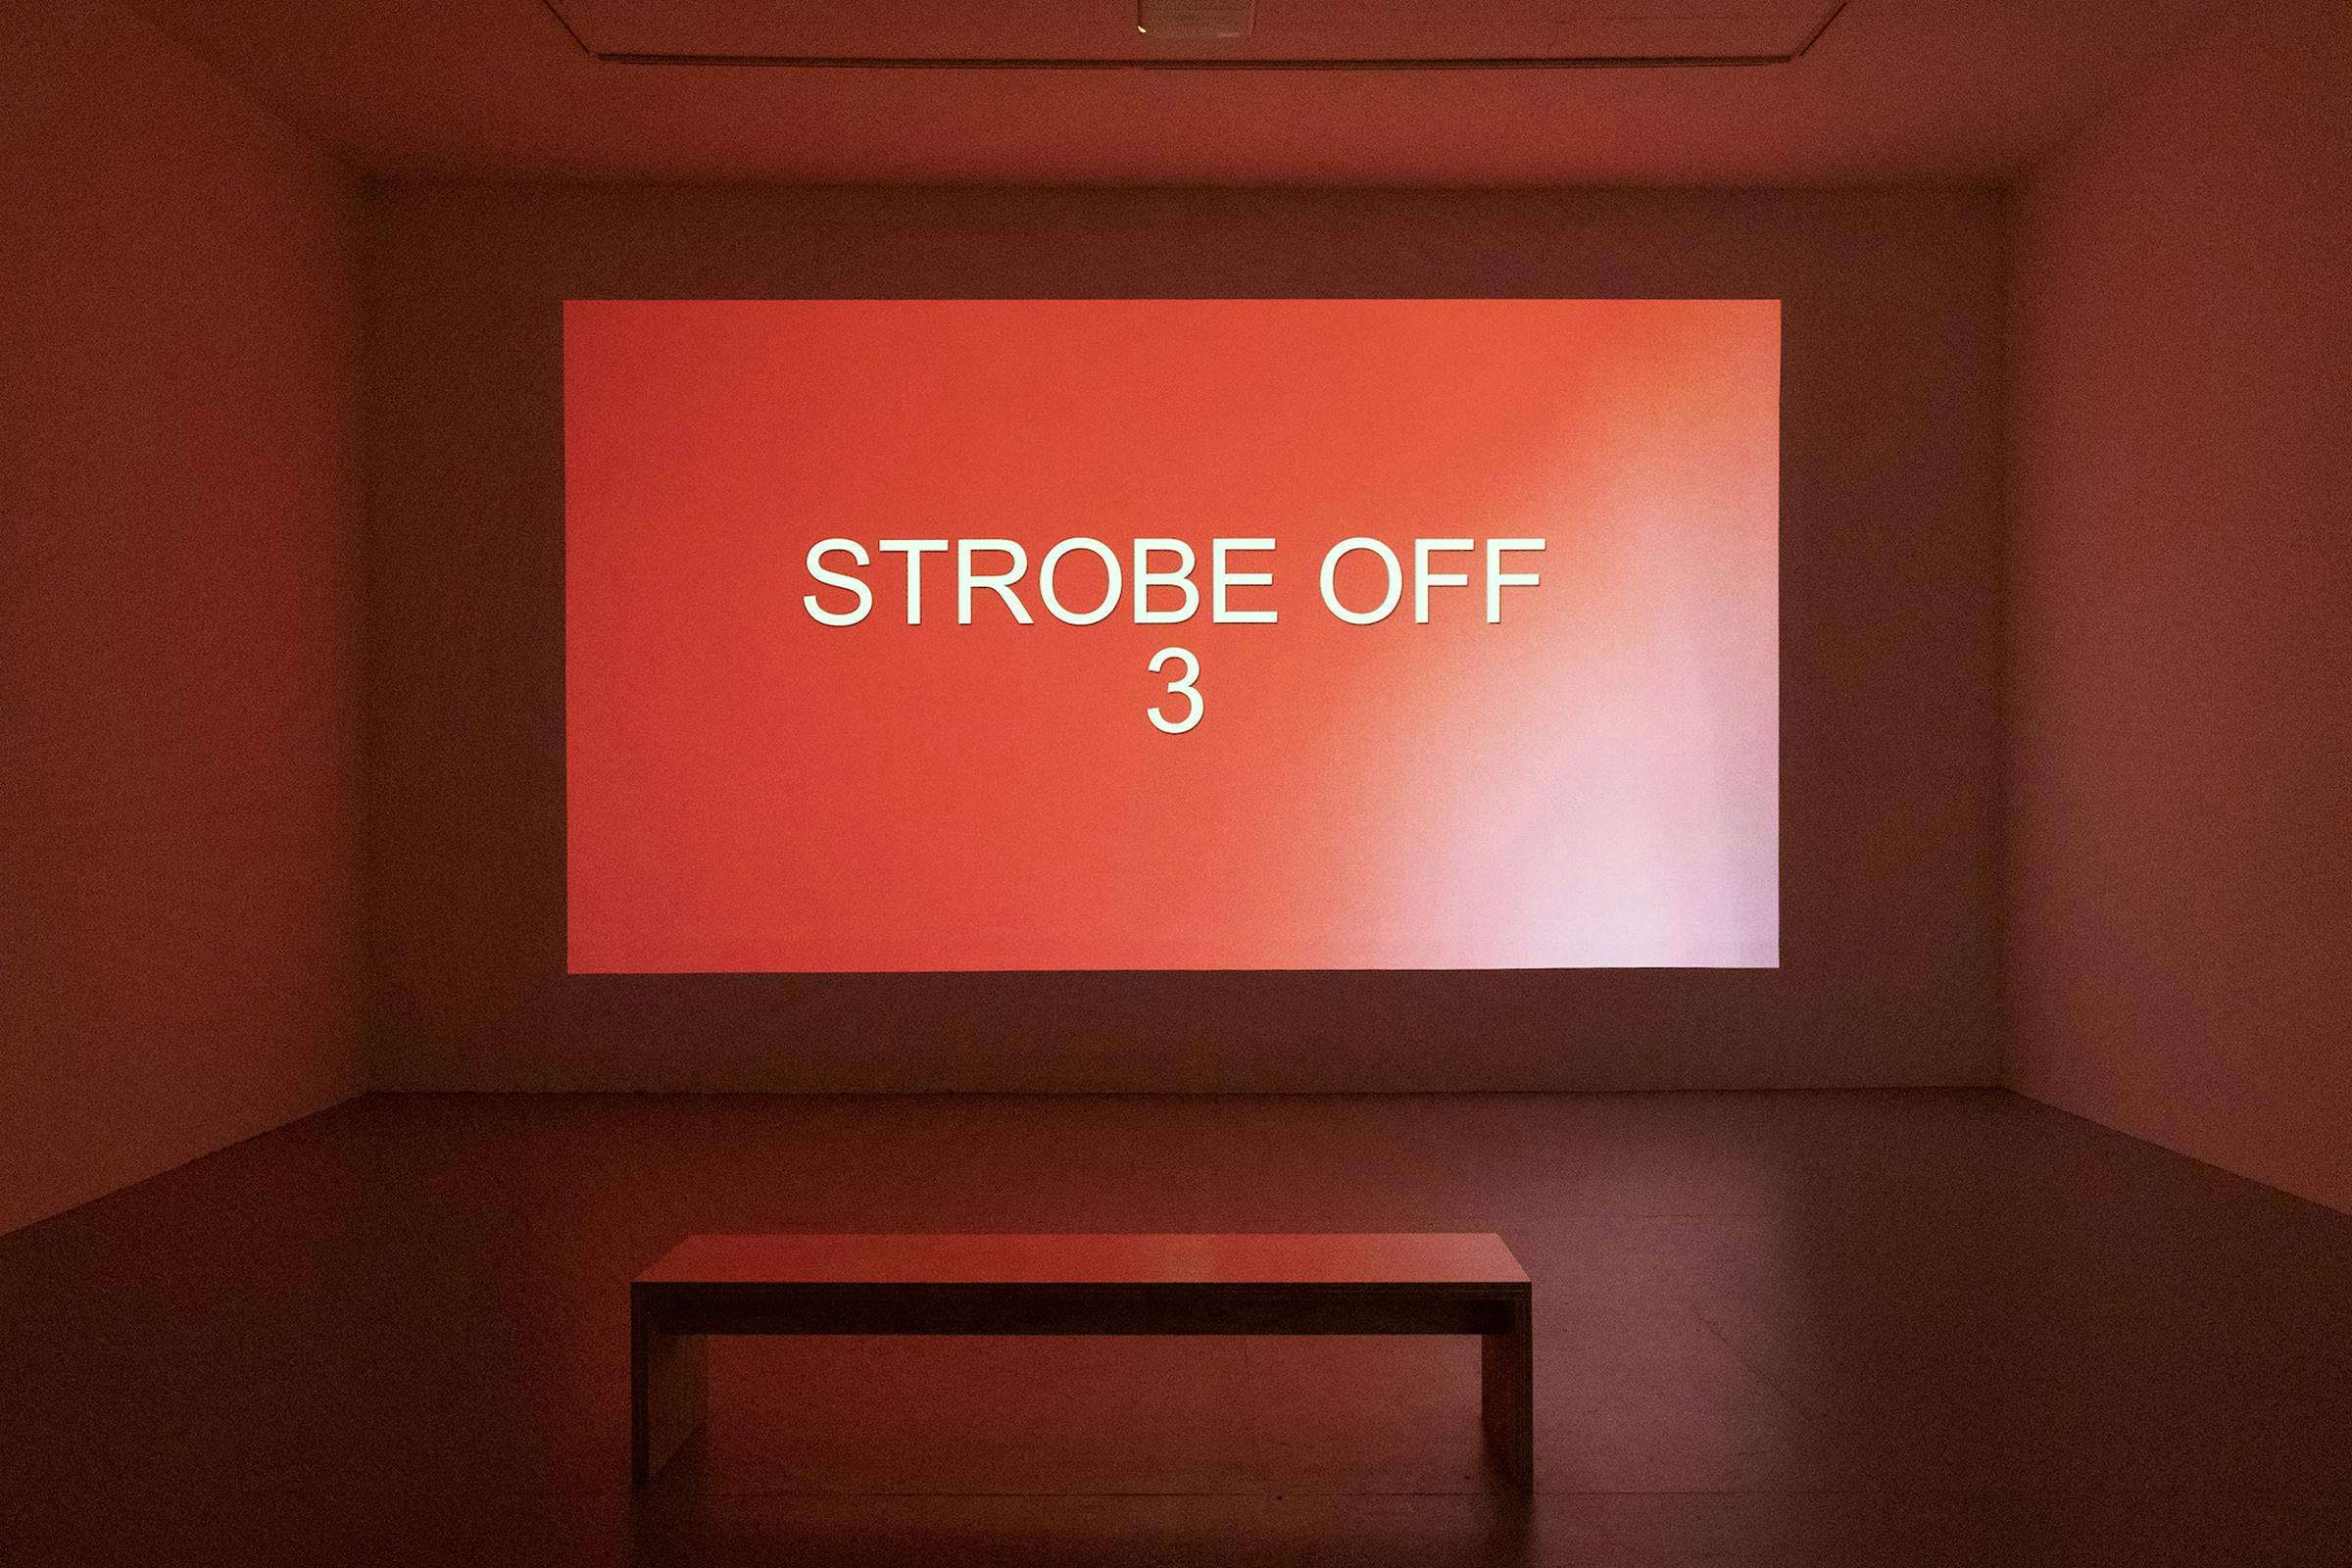 Projection of a red image with words 'STROBE OFF 3' in white projected in a gallery space.